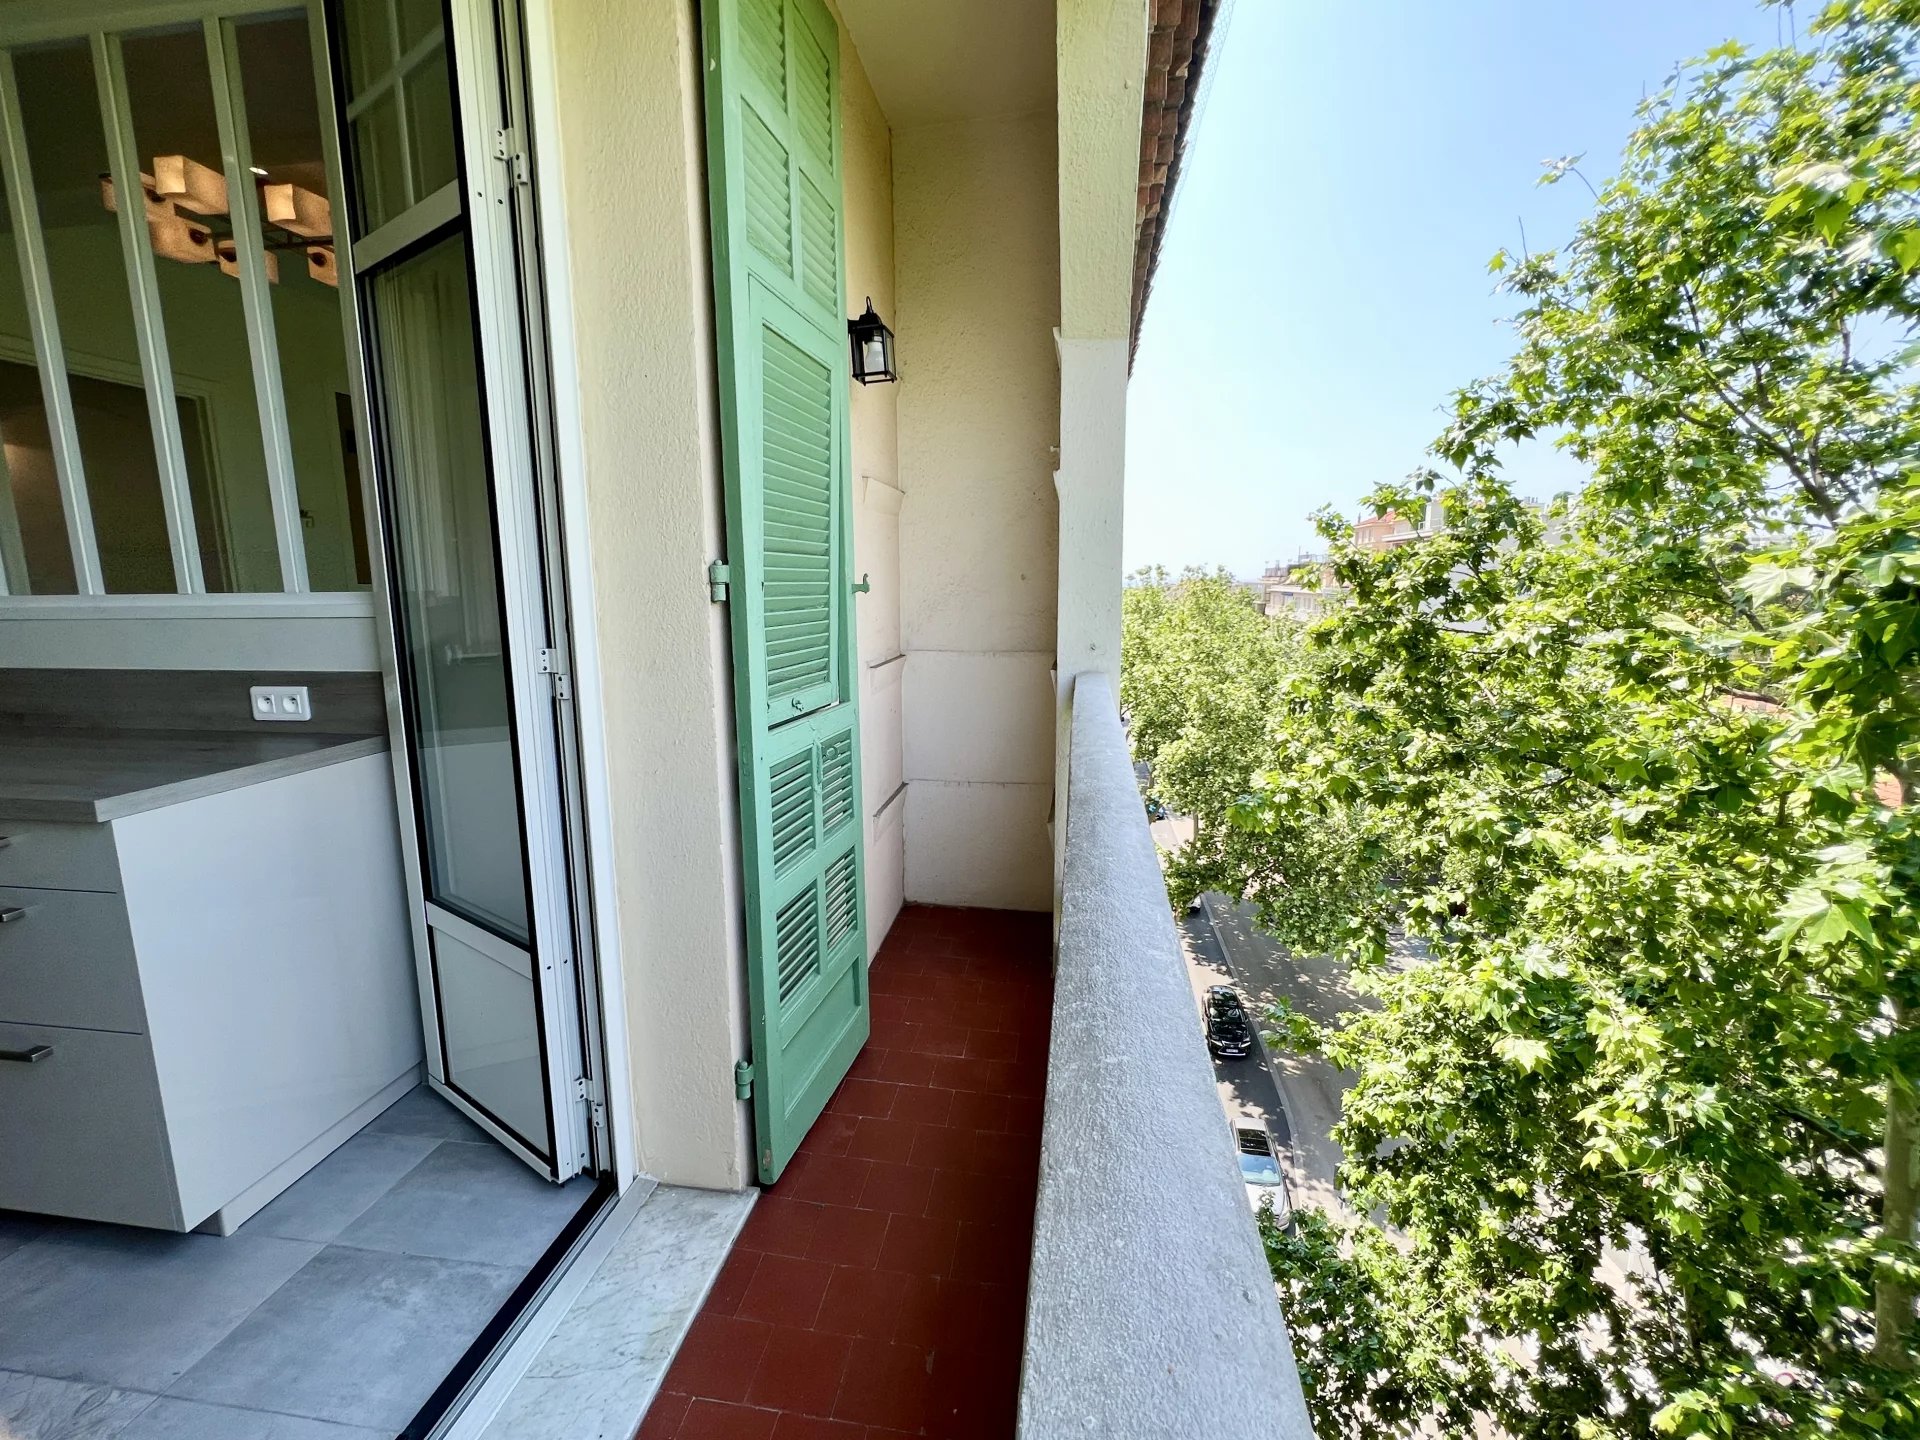 Bourgeois of 1or 2 bedrooms with high floor balconies, elevator and cellar